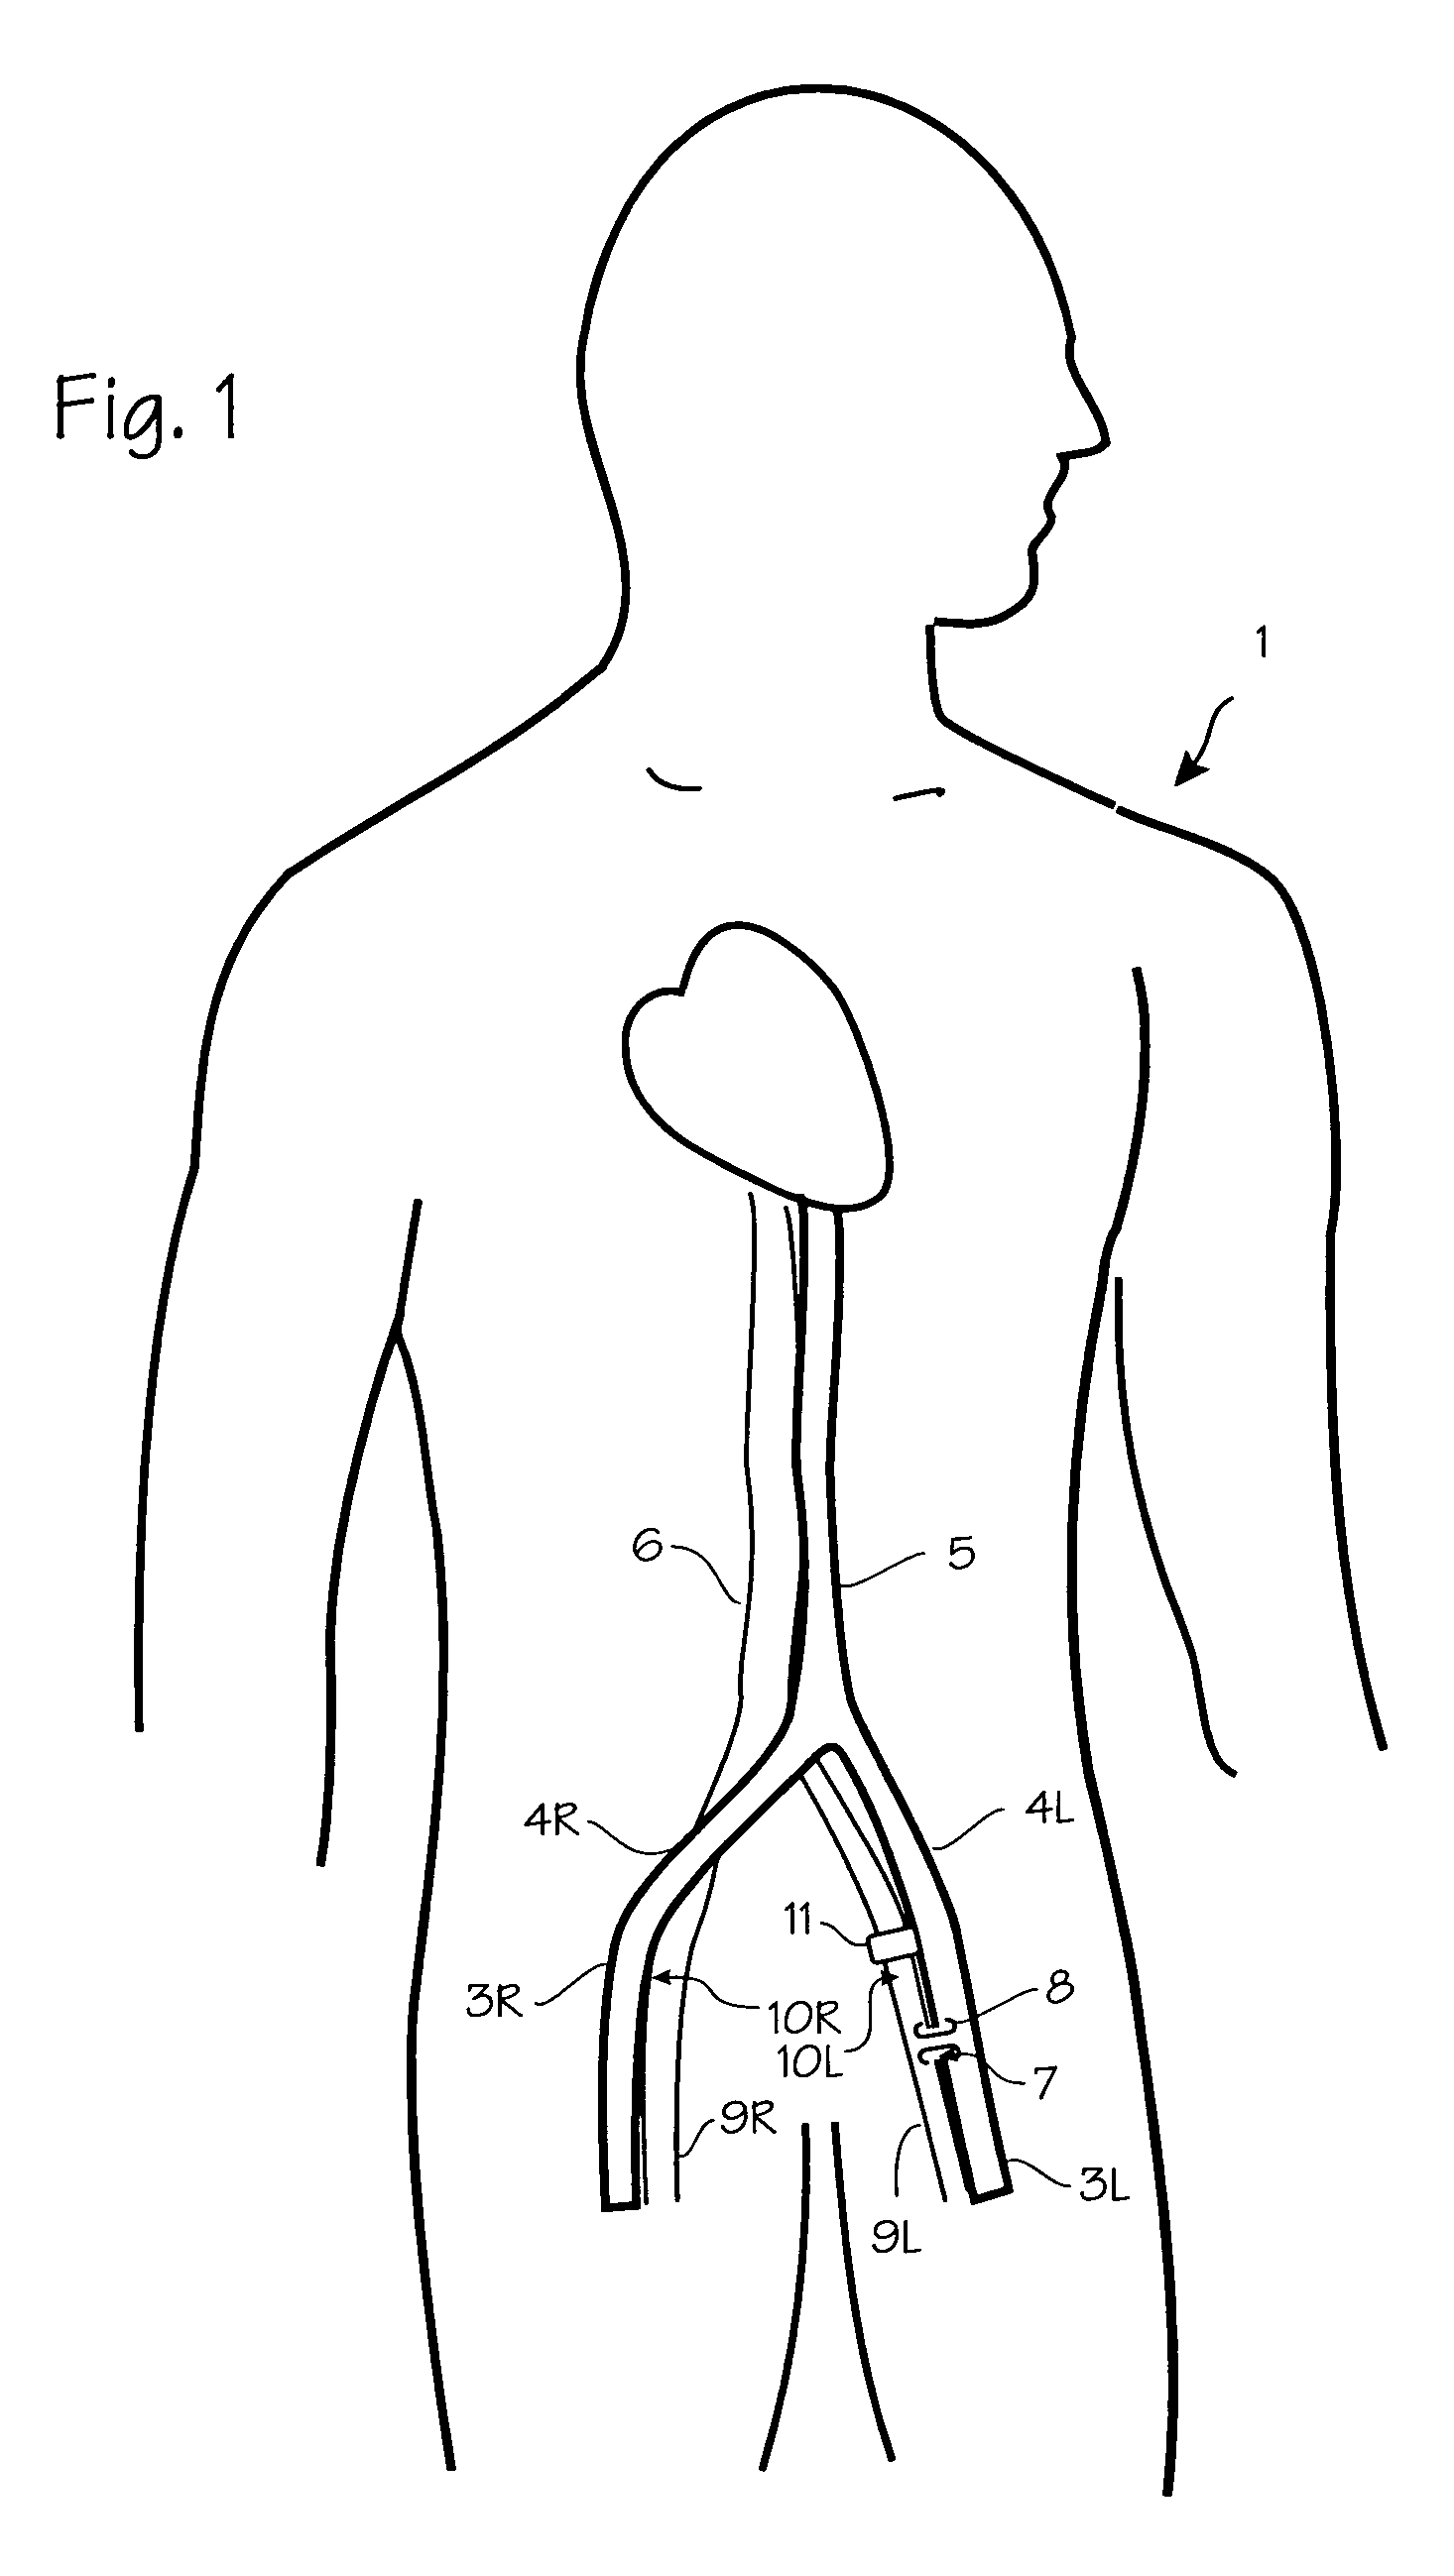 Method of treating COPD with artificial arterio-venous fistula and flow mediating systems